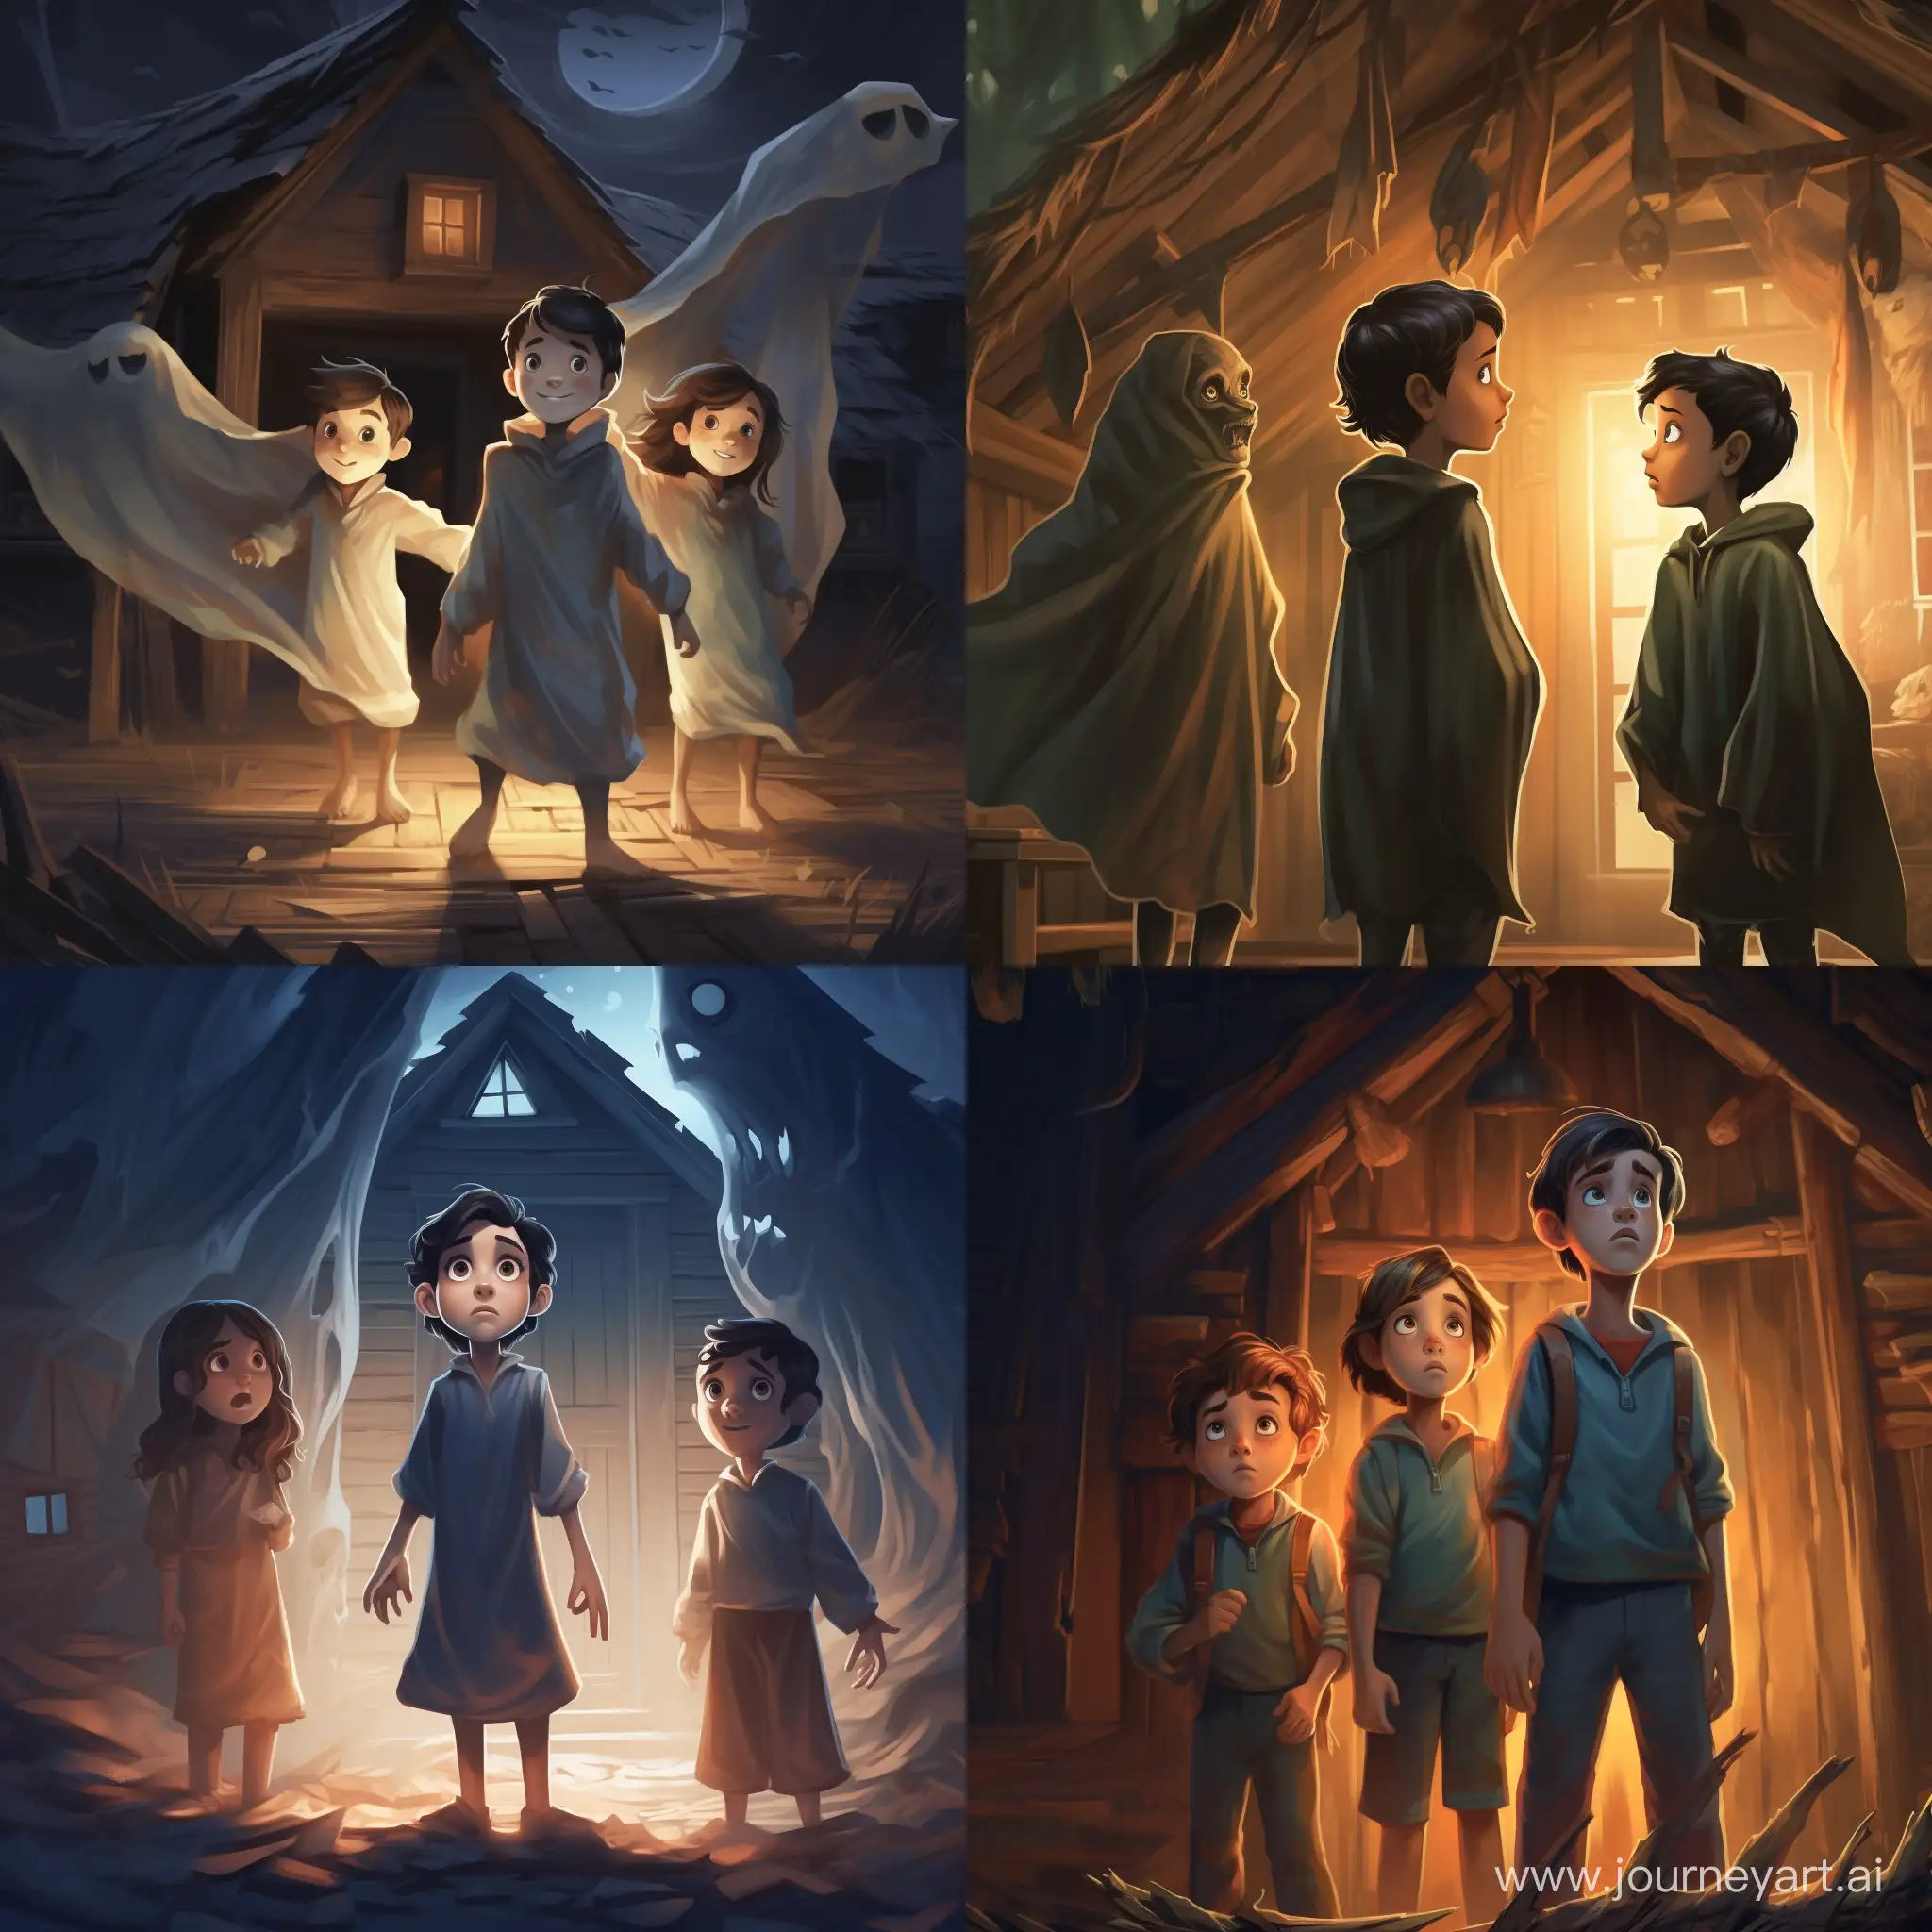 Create an illustration for a children's book, depicting a [Exactly three children standing in an old house] with [ghost in the picture], [haunted house] and a [sense of wonder].